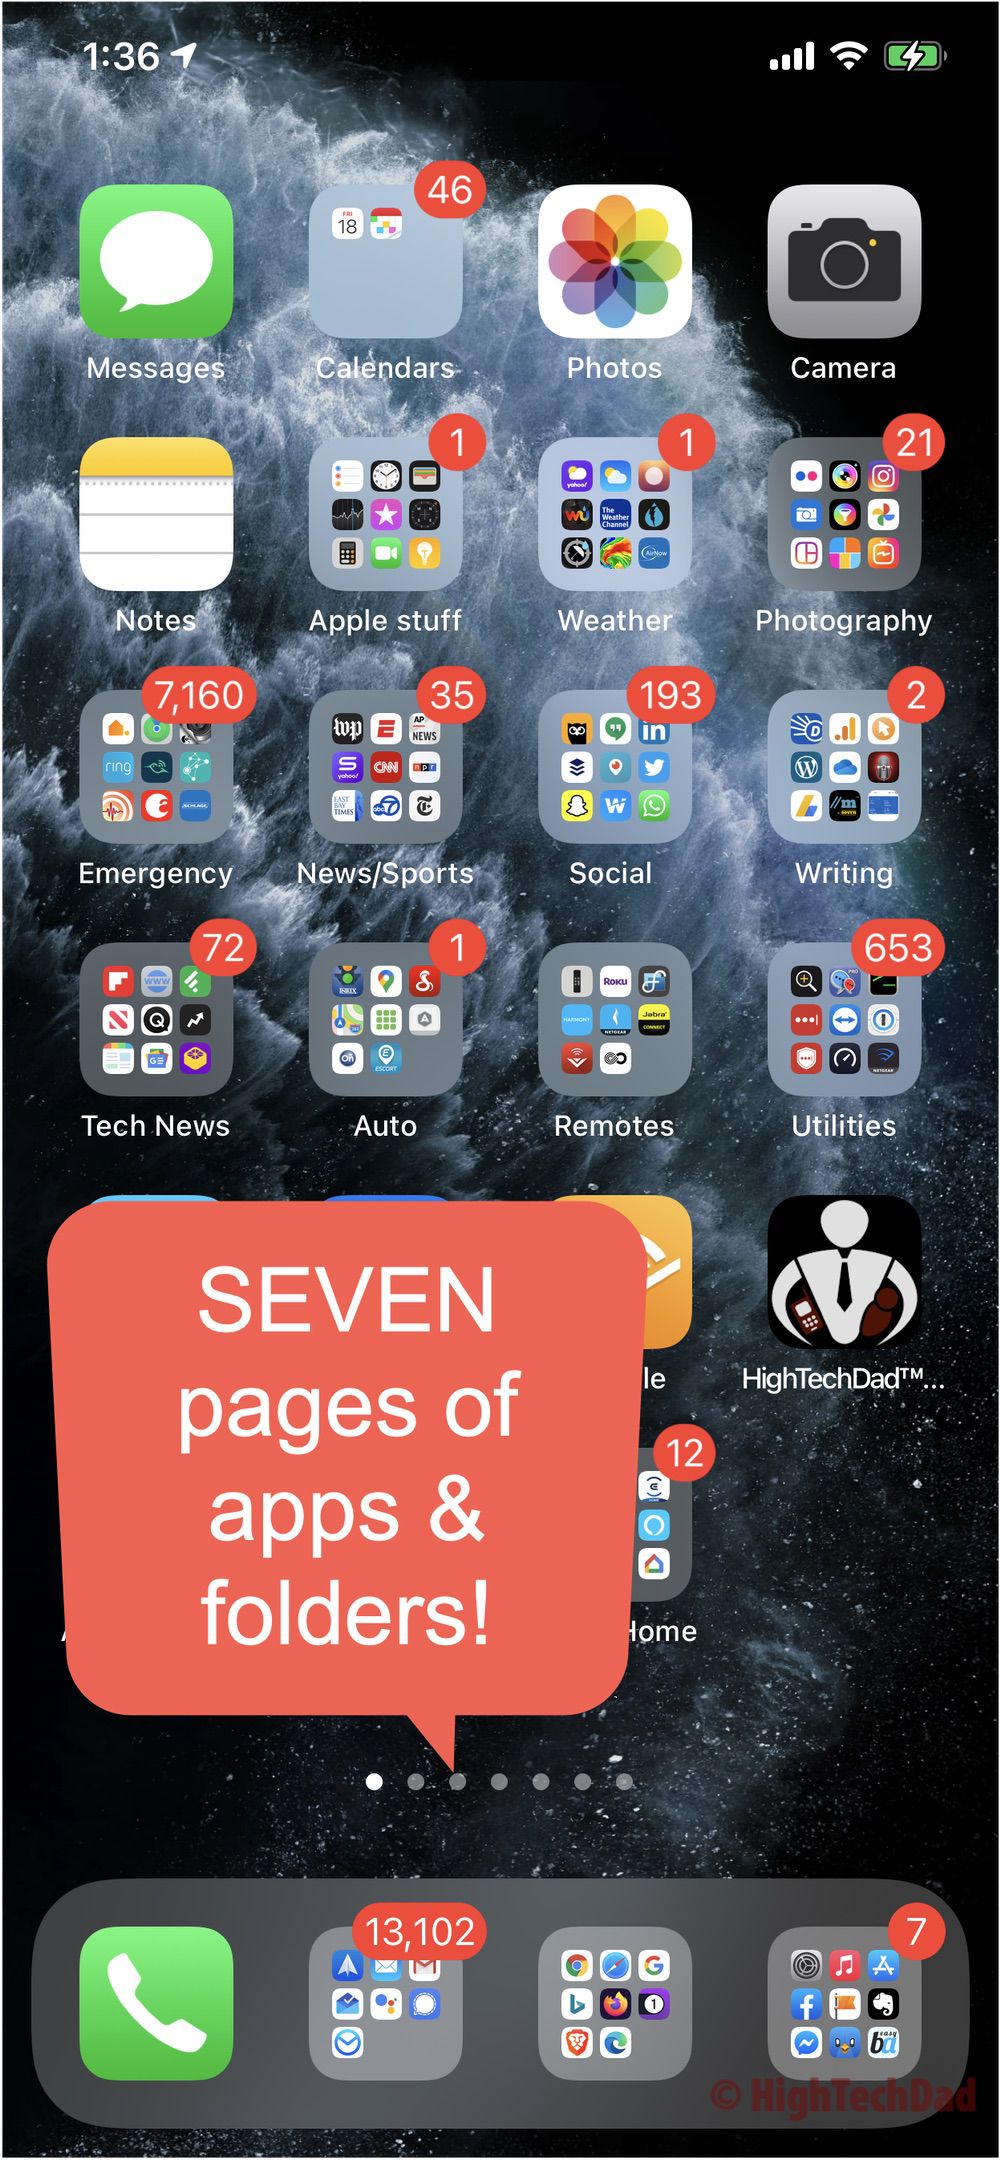 Multiple pages on HighTechDad's iPhone - iOS 14 tip